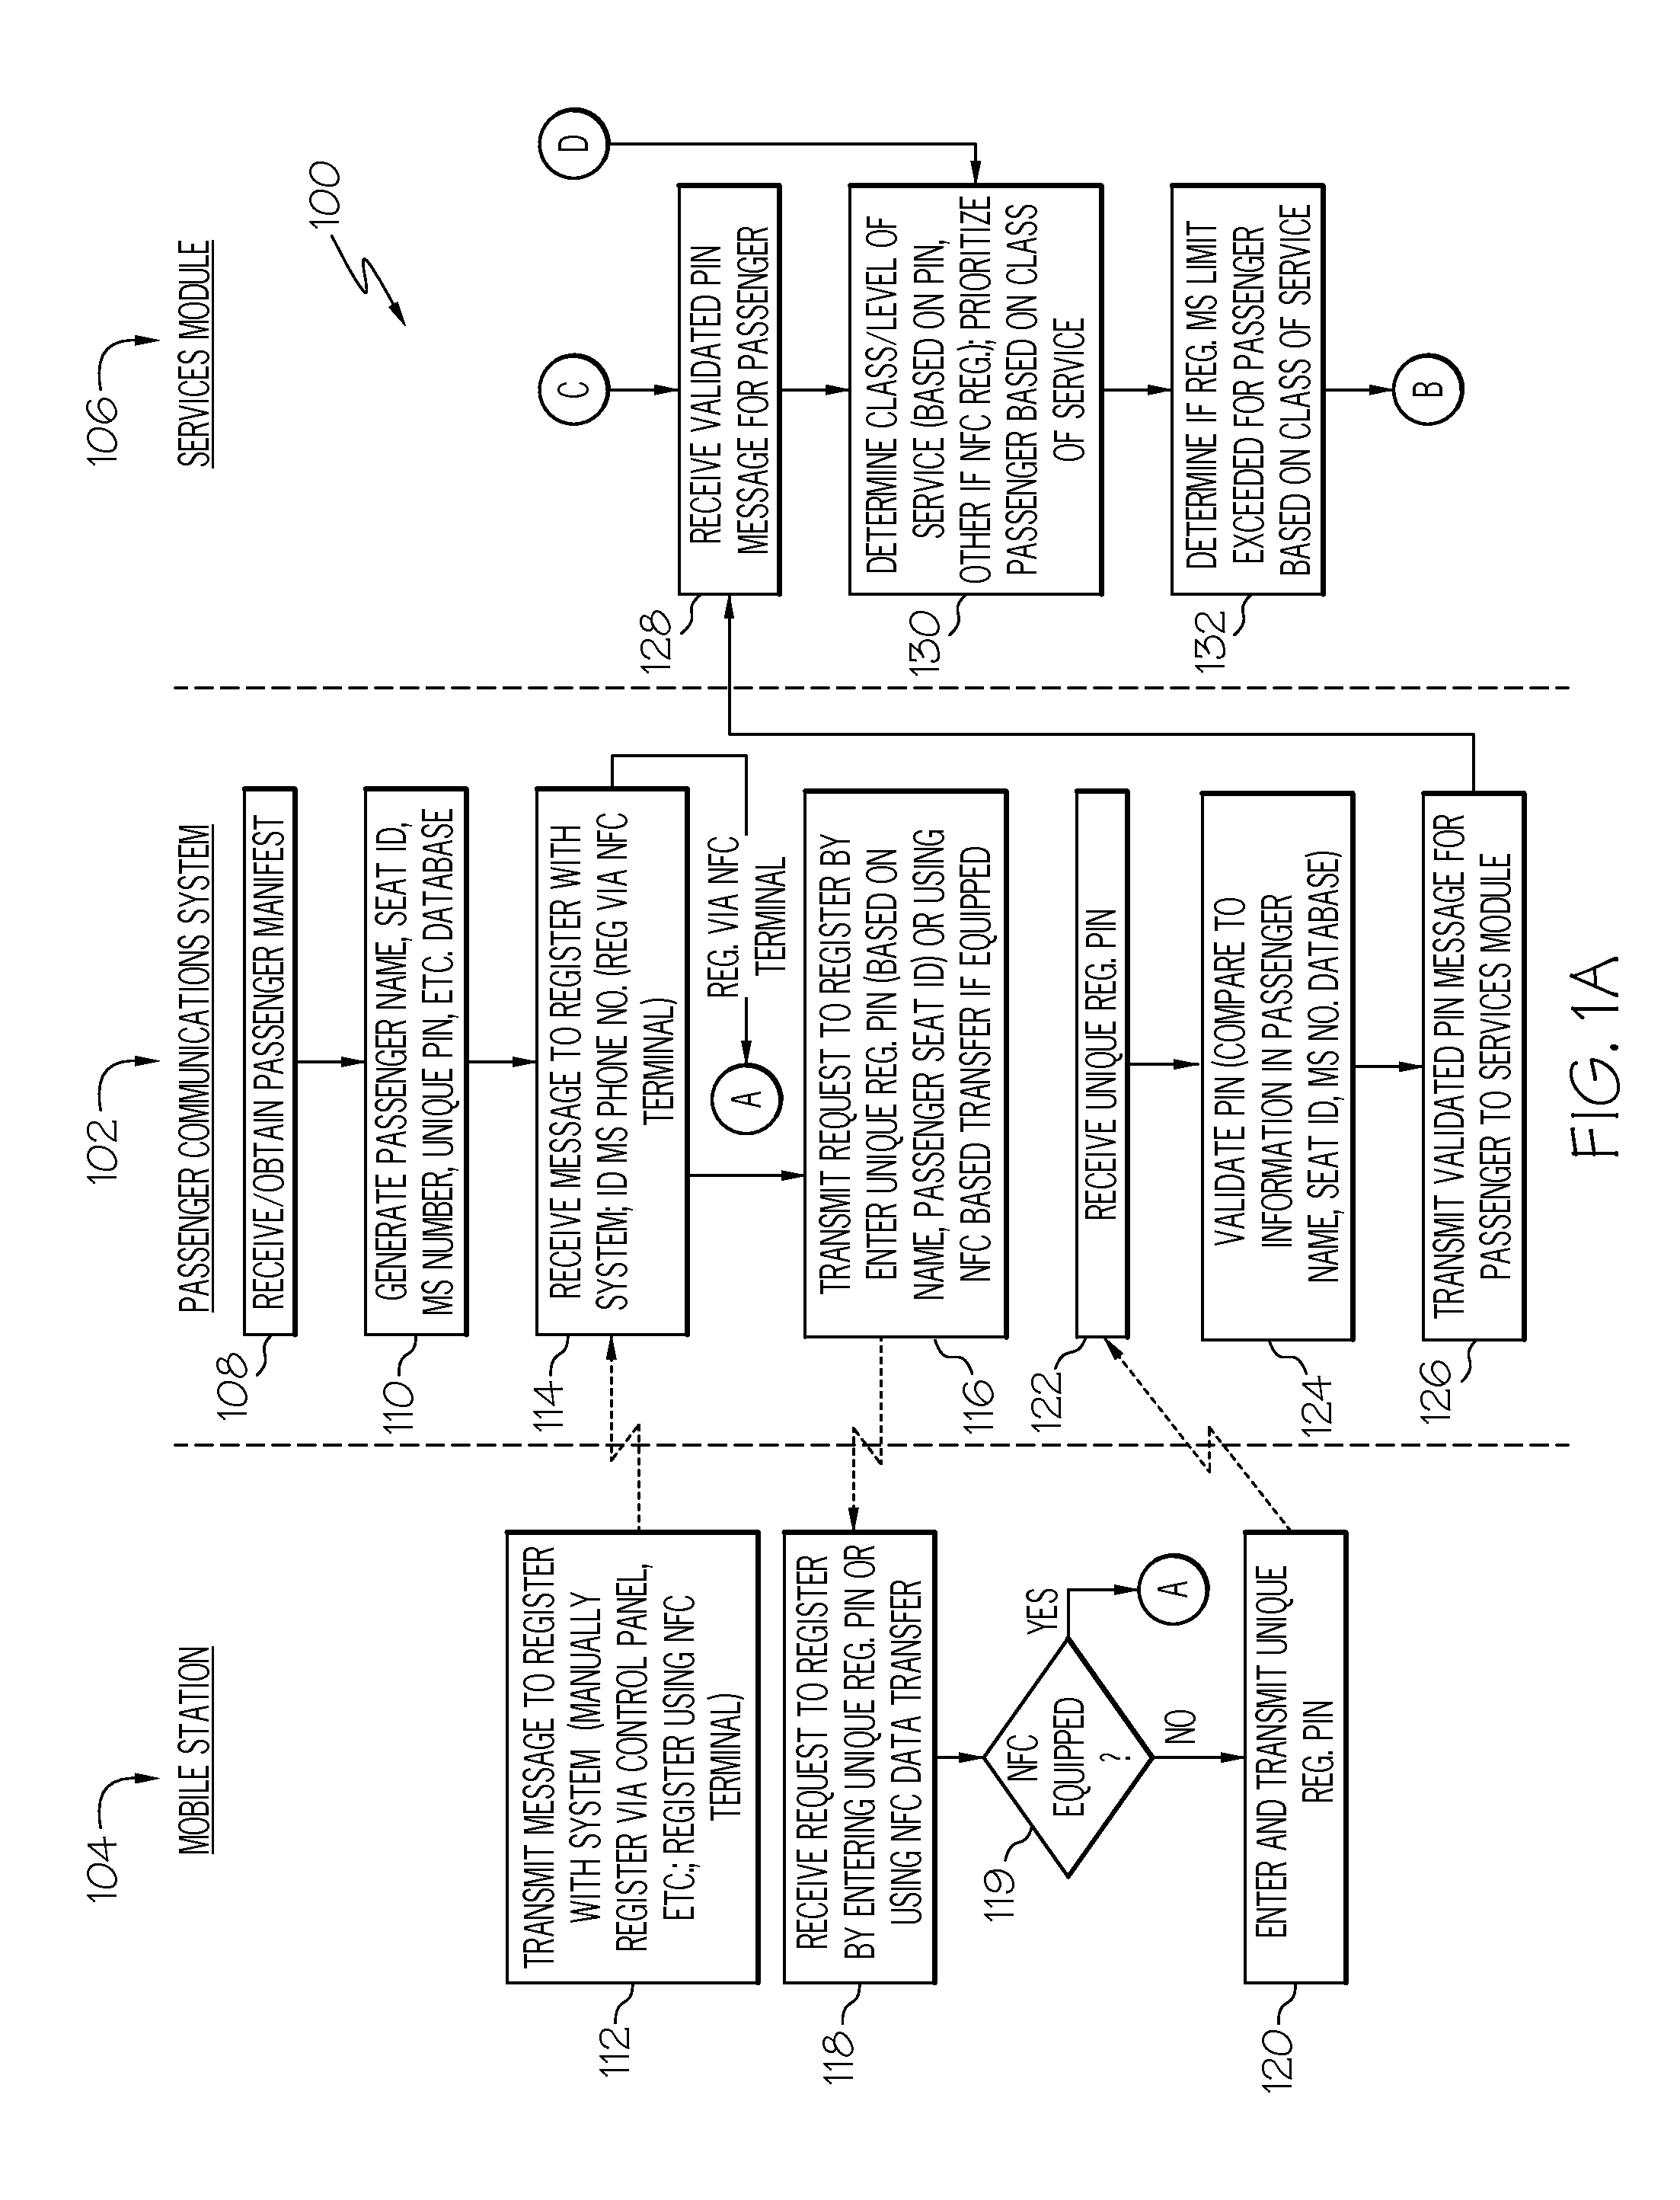 Passenger mobile station registration with a passenger communications system using near field communicaitons